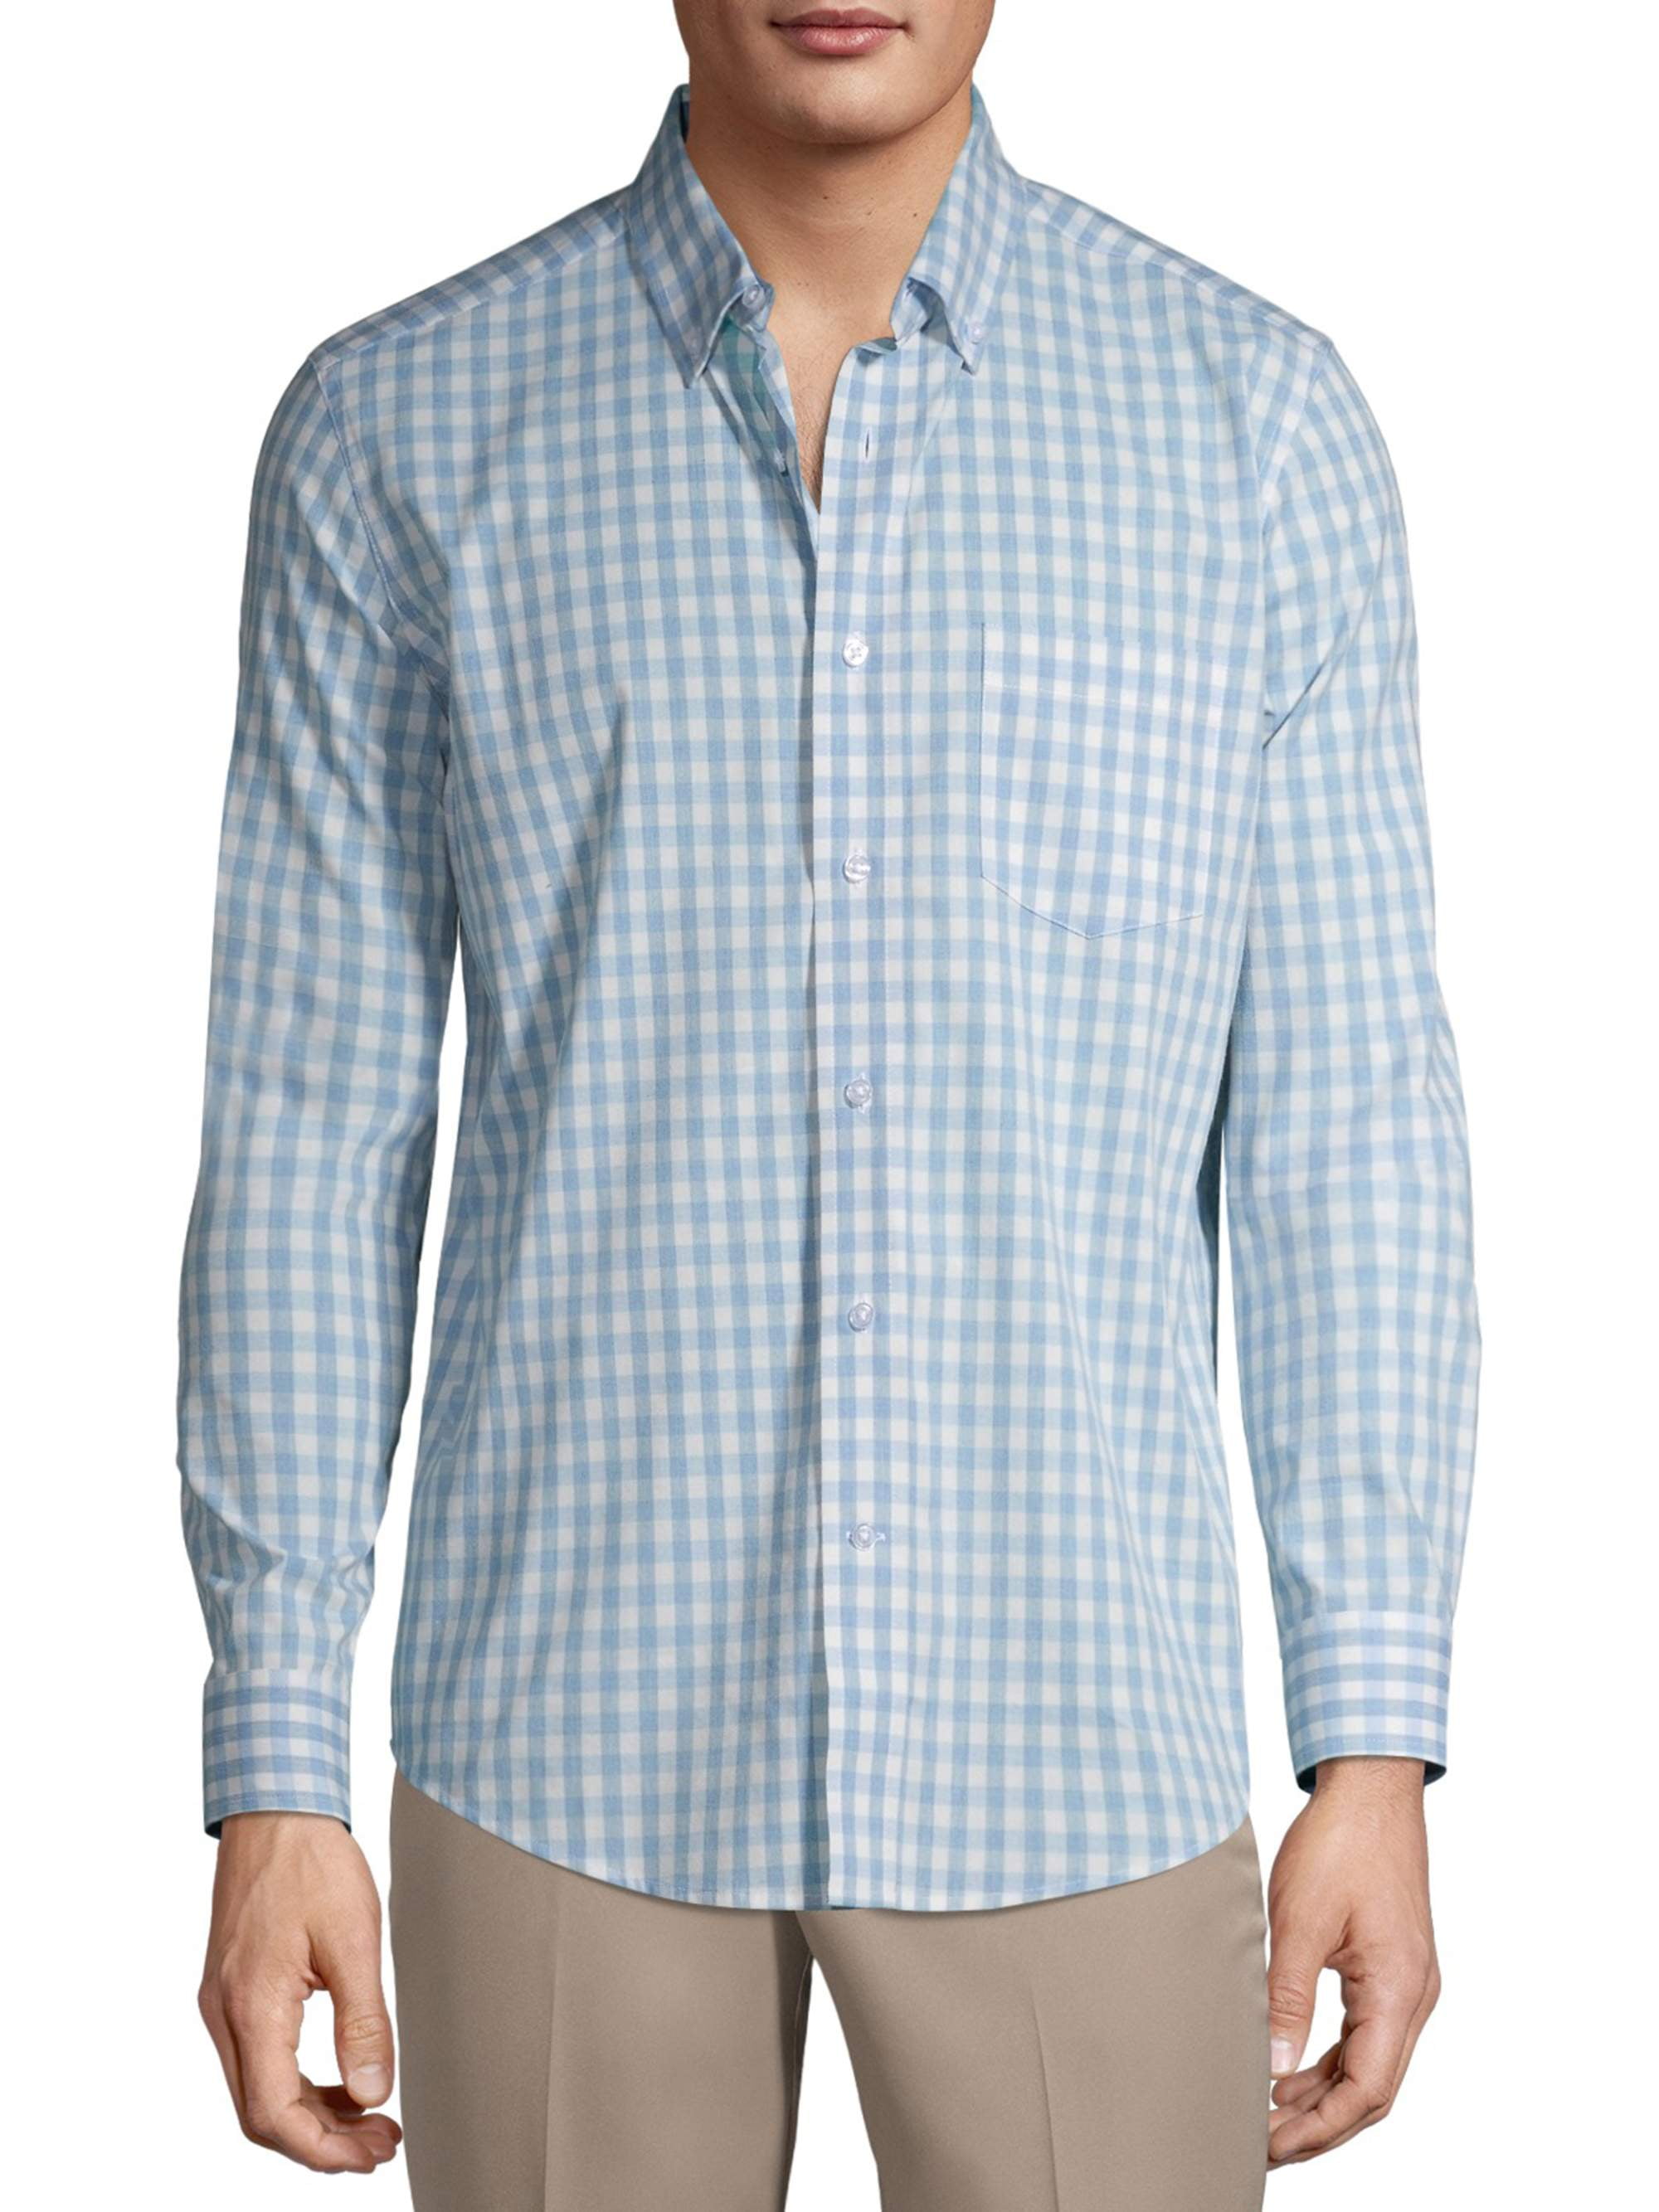 Winwinus Mens Plus-Size Button Down Plaid Short Sleeve Relaxed-Fit Dress Shirts